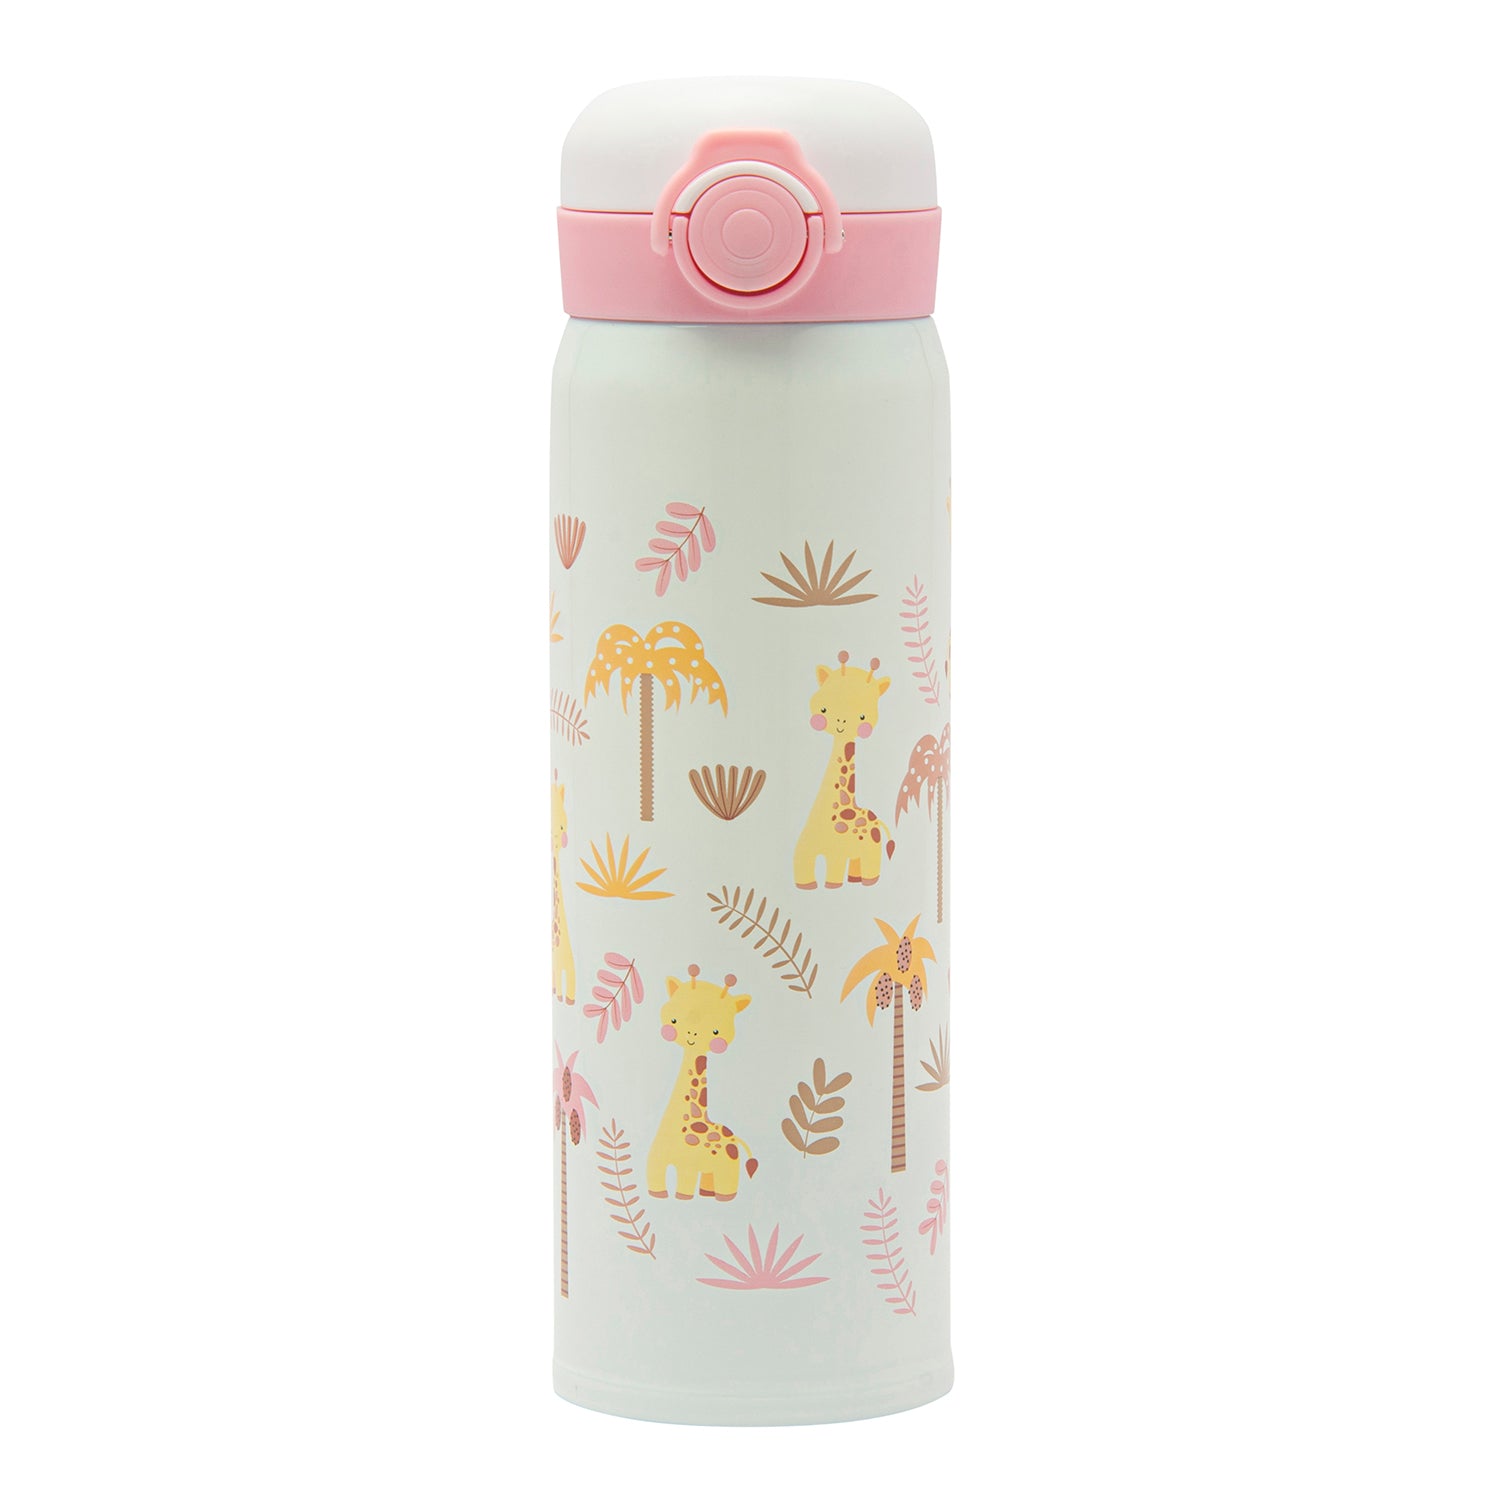 Giraffes in the Wild Pink 500 ml Stainless Steel Flask - Baby Moo